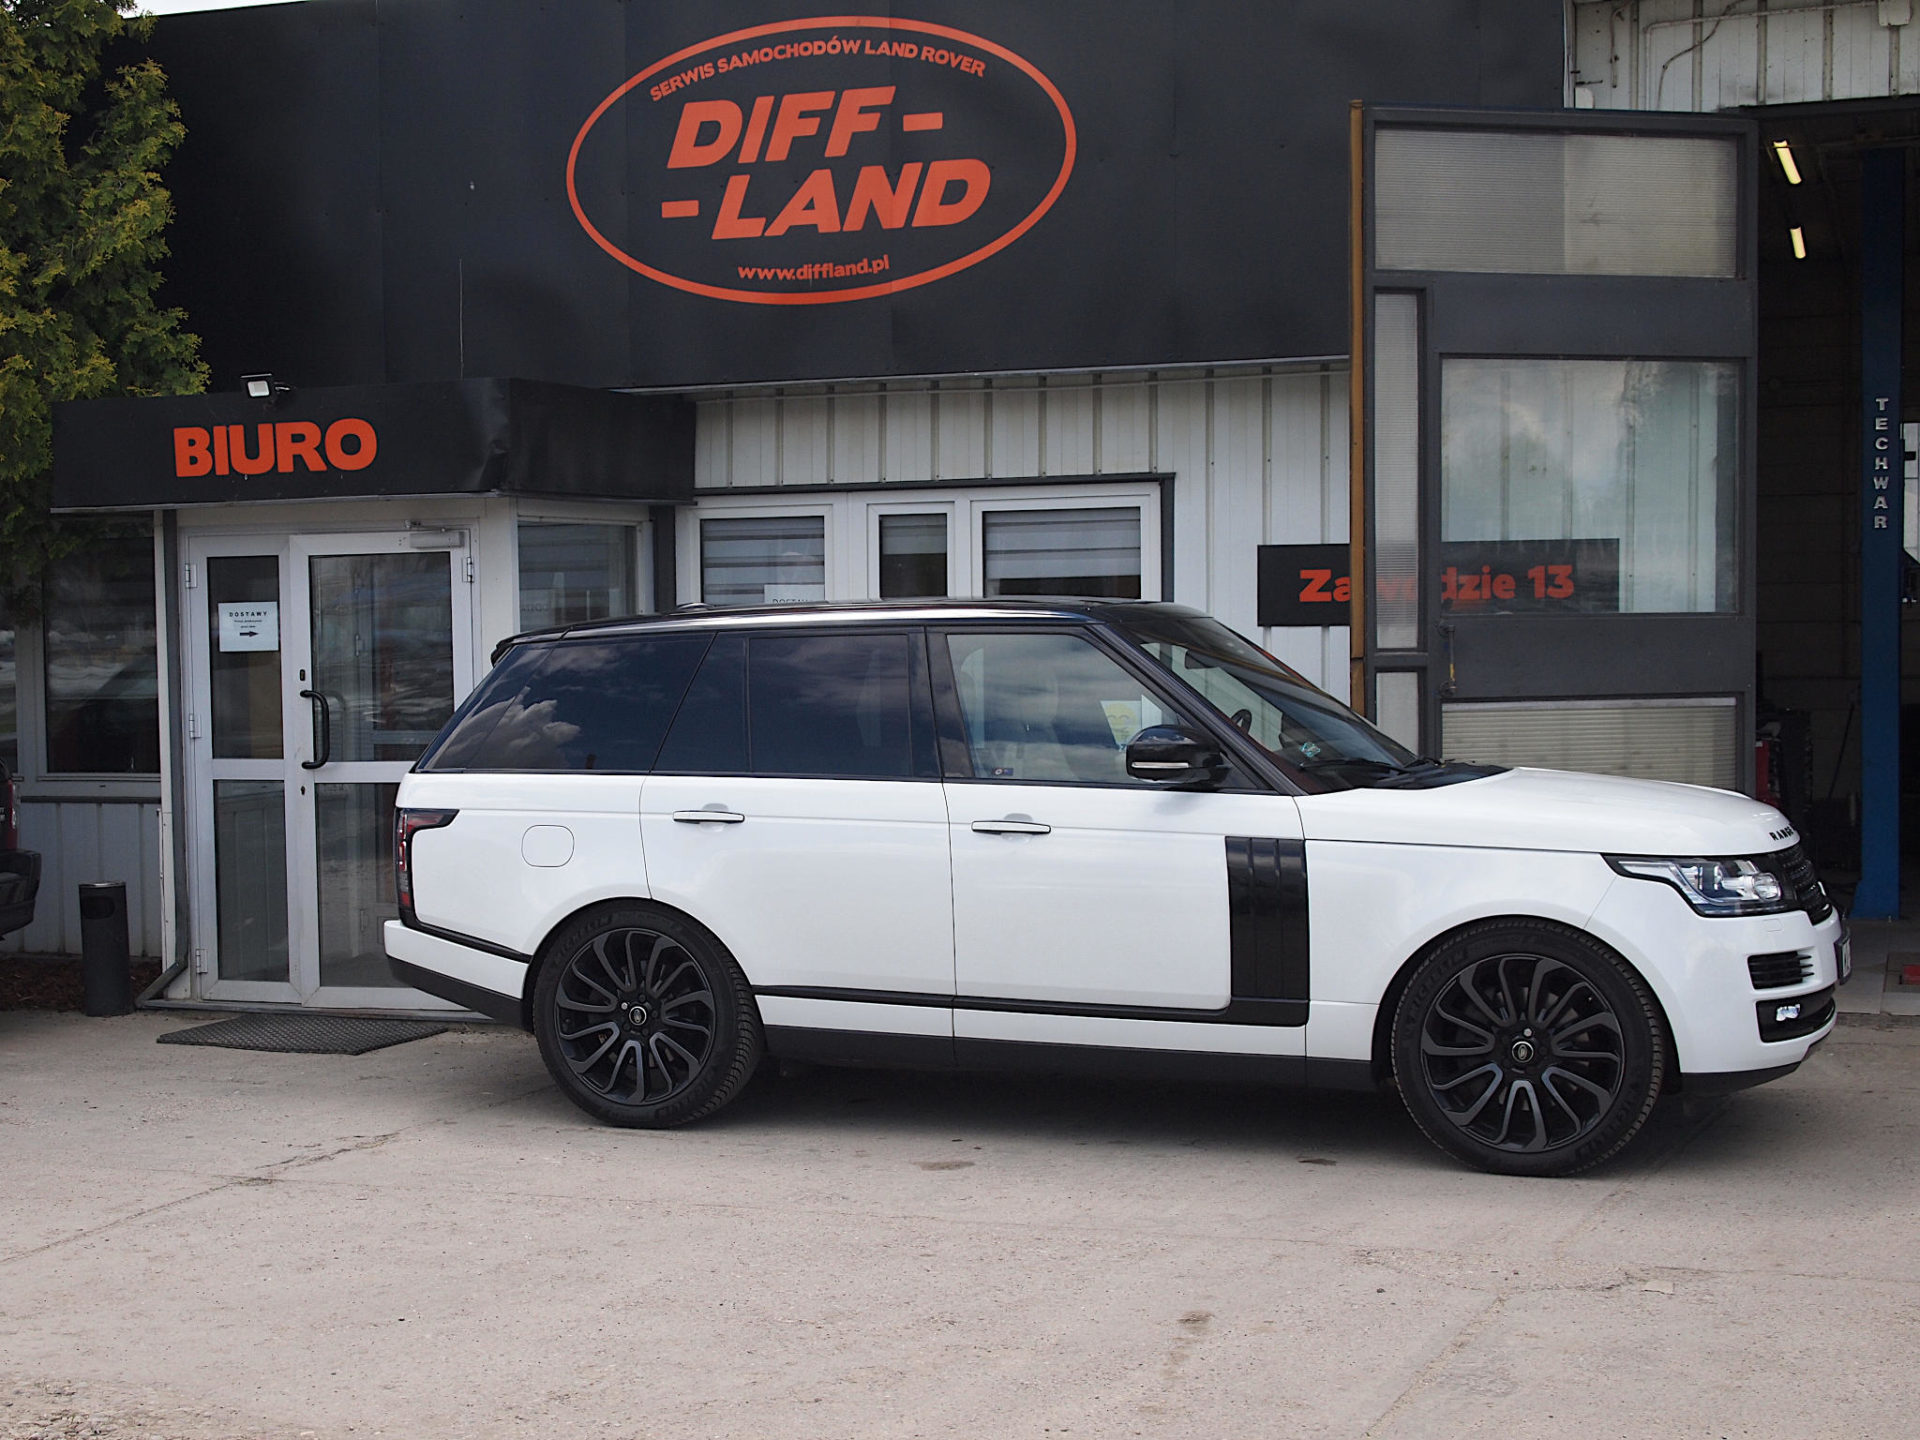 Land Rover Range Rover 4.4SD Autobiography diffland.pl